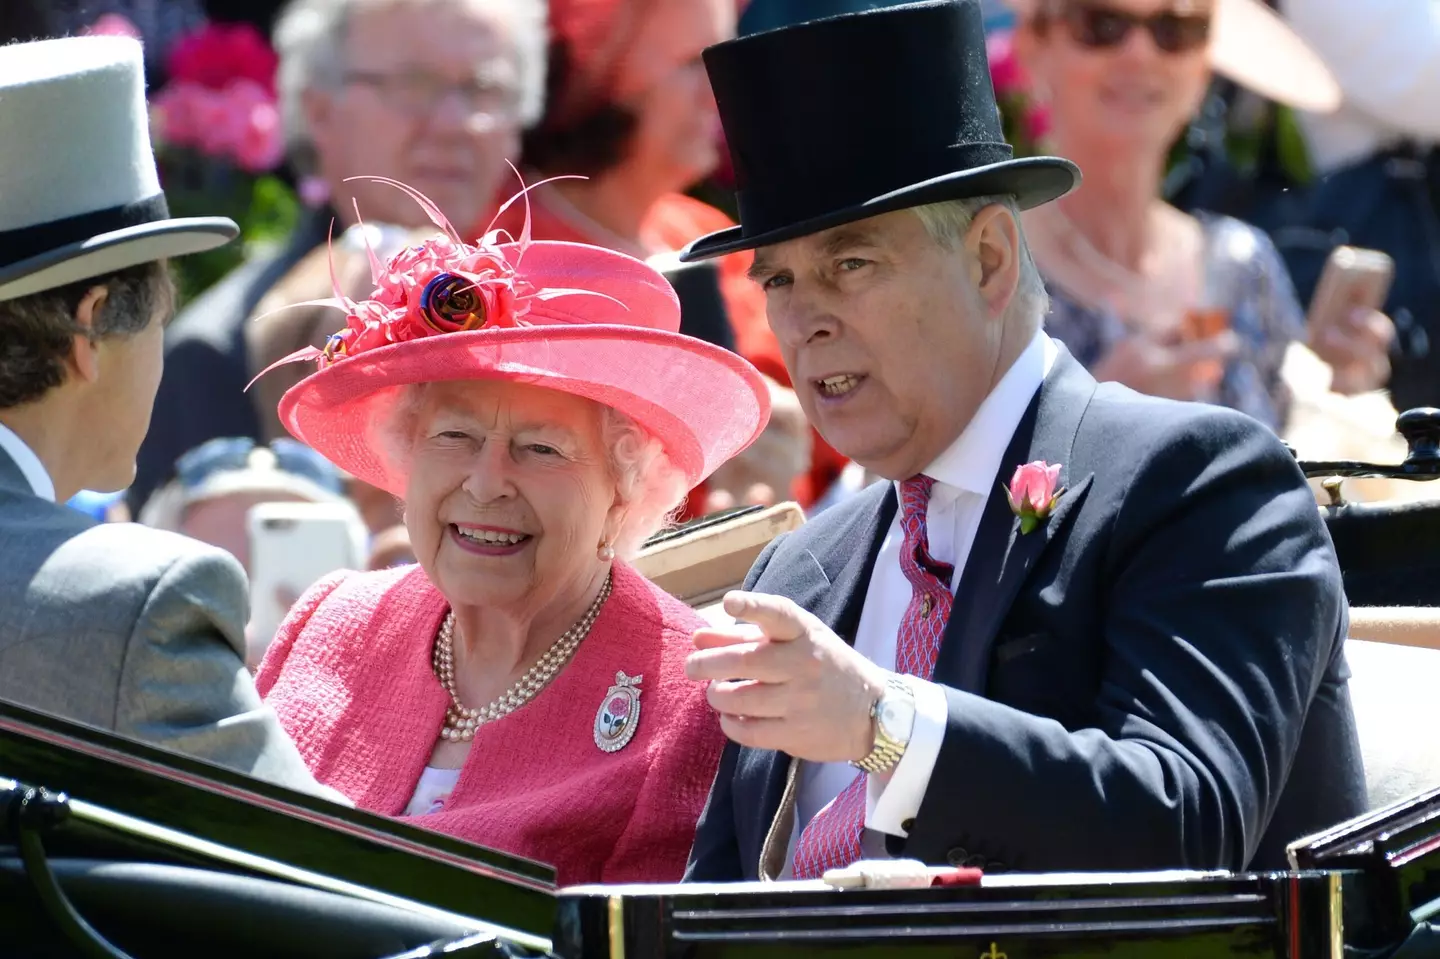 The Queen and Prince Andrew in a carriage. (Alamy) 